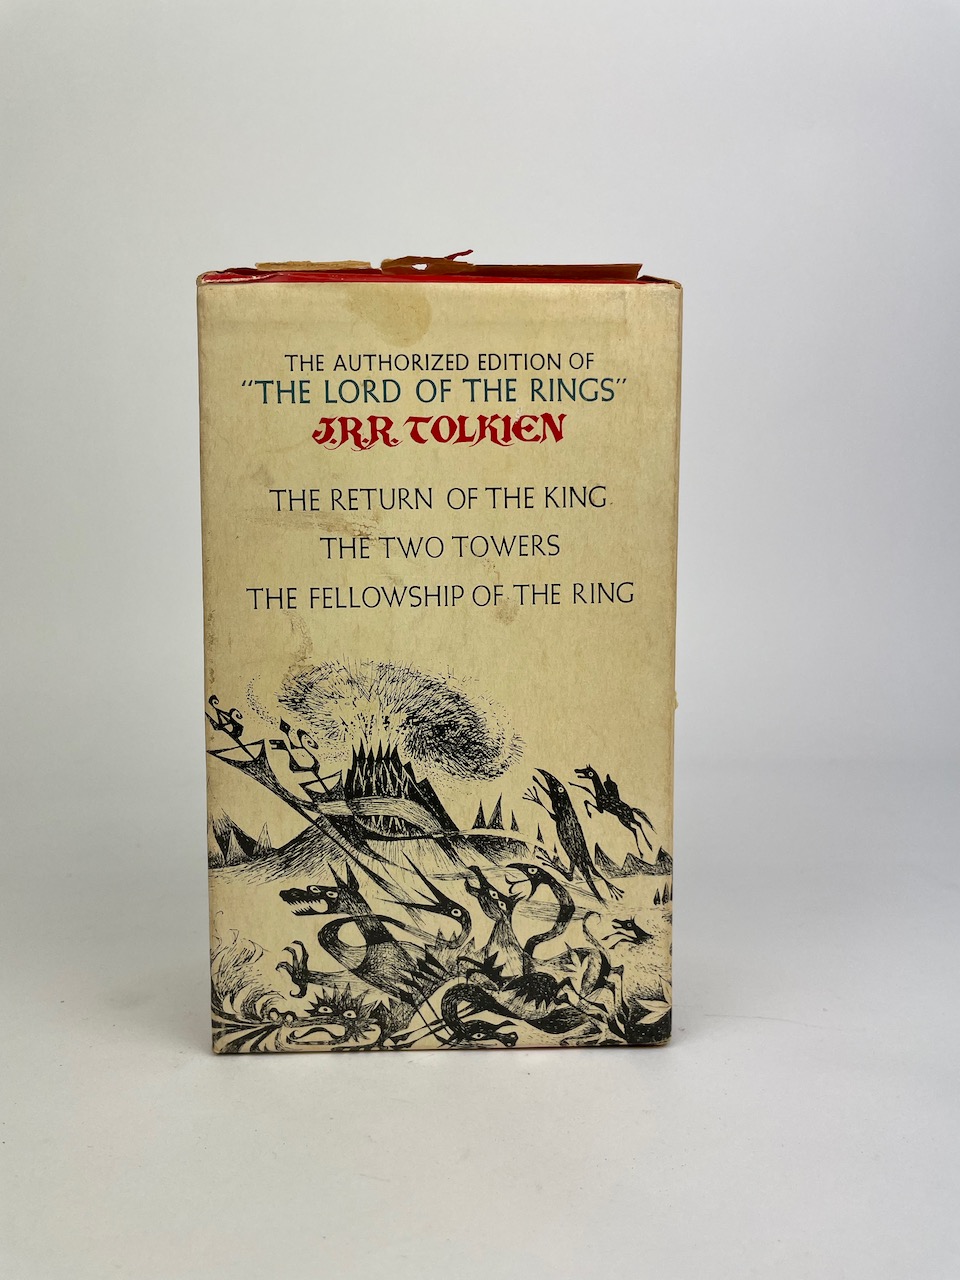 The Lord of the Rings from 1968, Authorized Edition in Black, White and Red Publishers Slipcase 5